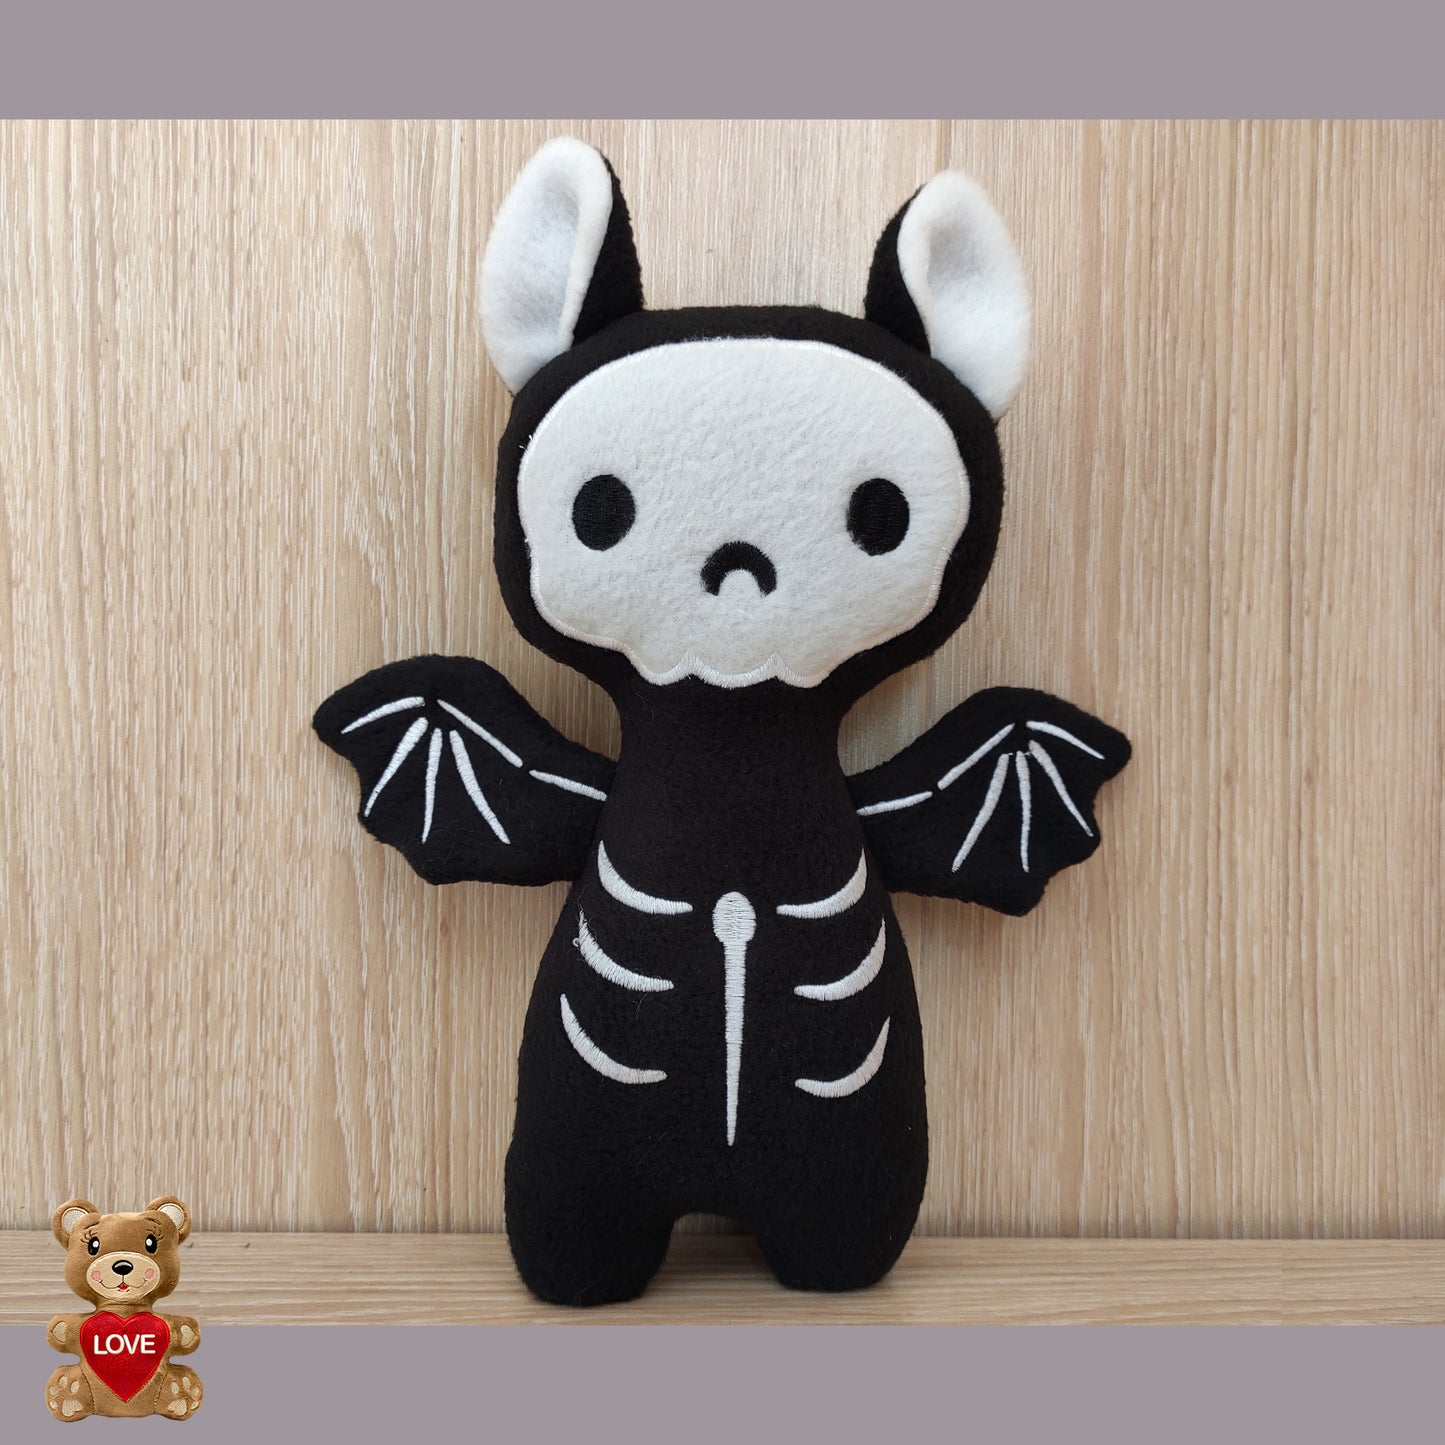 Personalised embroidery Plush Soft Toy Haloween Bat ,Super cute personalised soft plush toy, Personalised Gift, Unique Personalized Birthday Gifts , Custom Gifts For Children